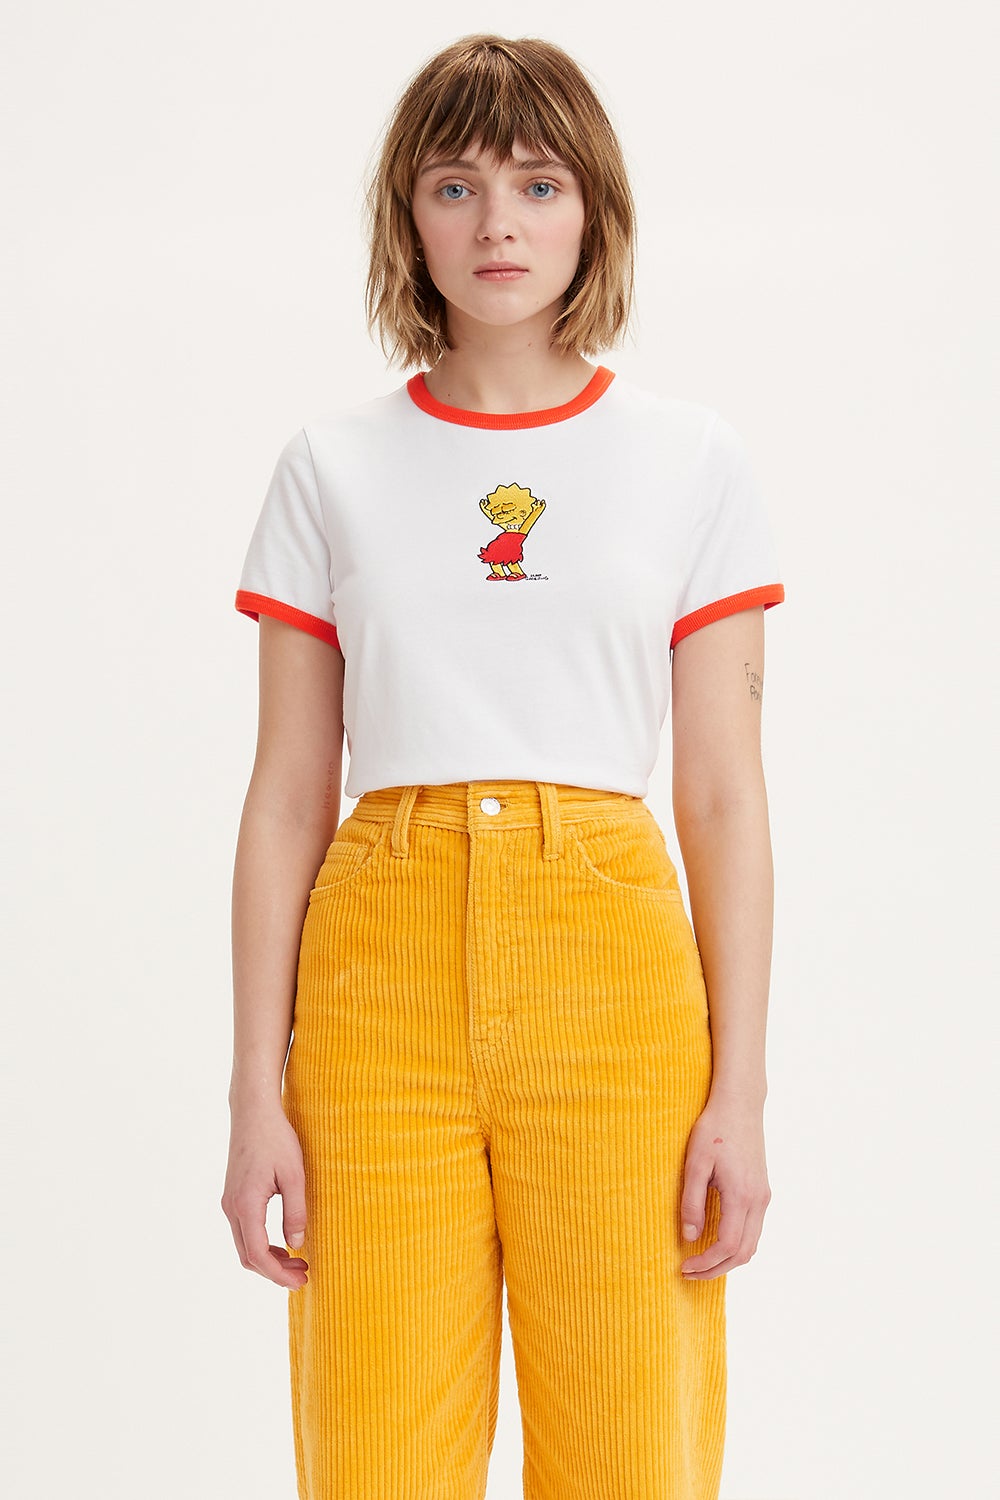 Levi's x The Simpsons Ringer T-Shirt Red